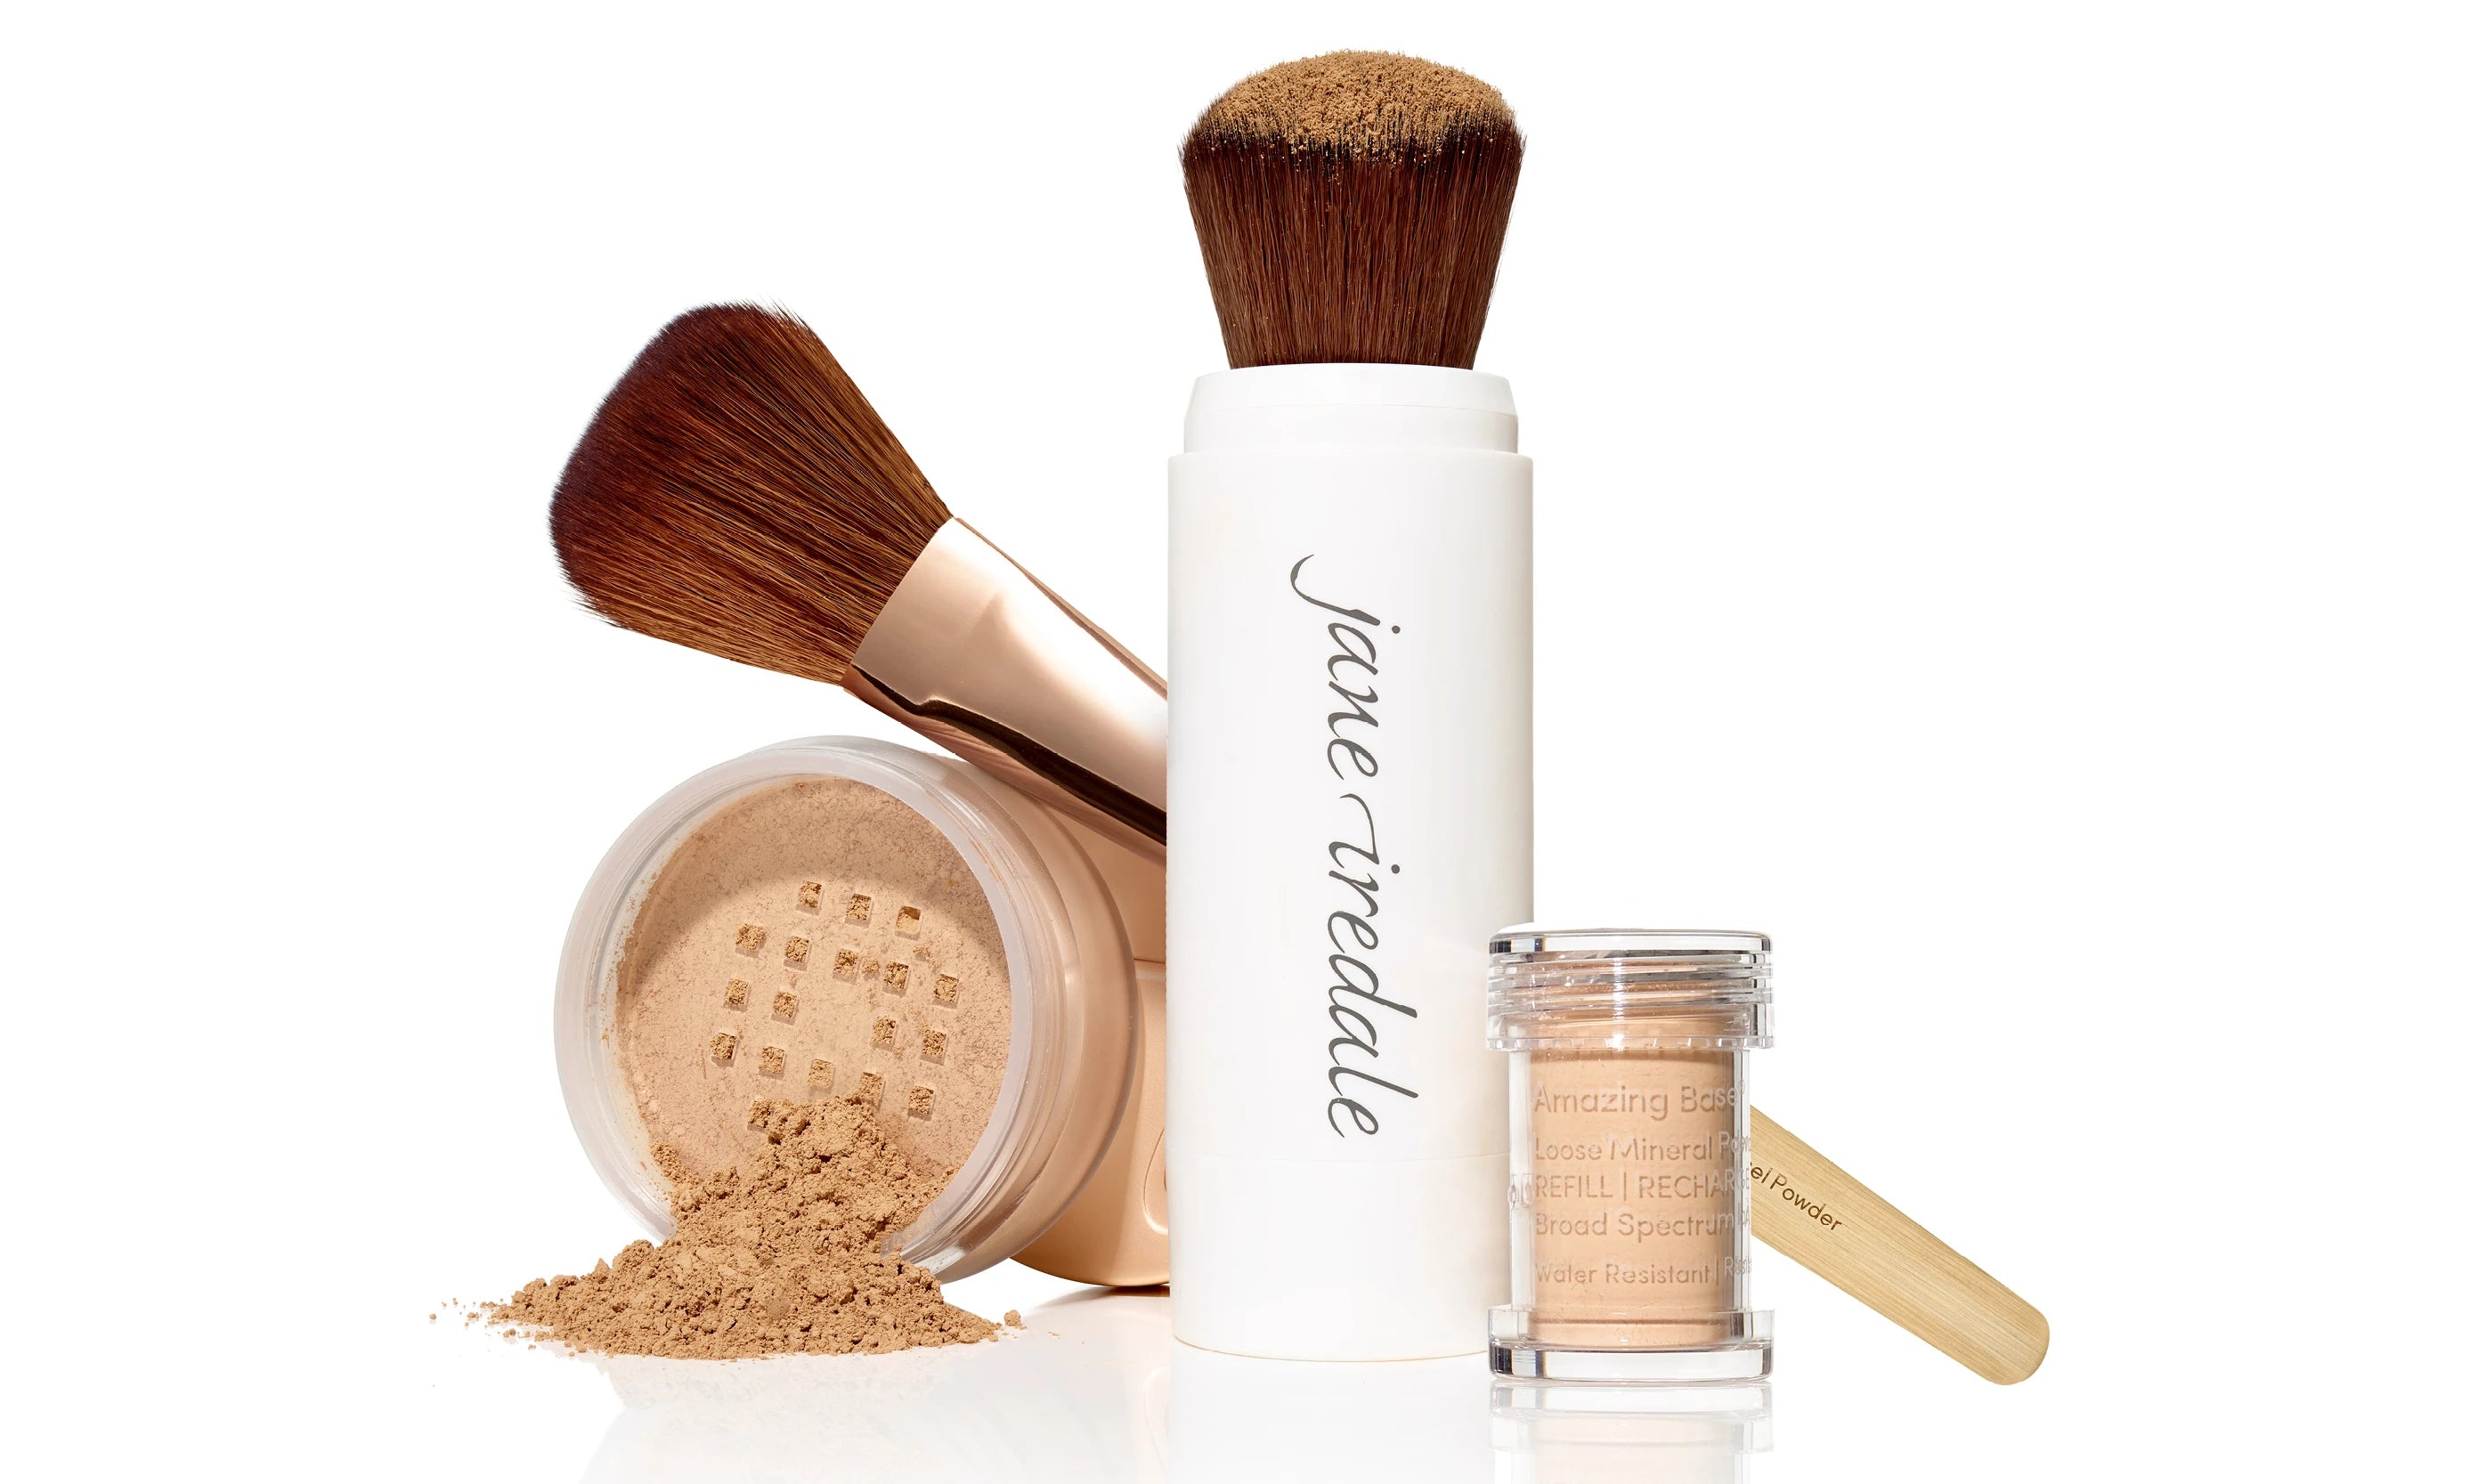 jane iredale Amazing Base Loose Mineral Powder Foundation for dry skin types